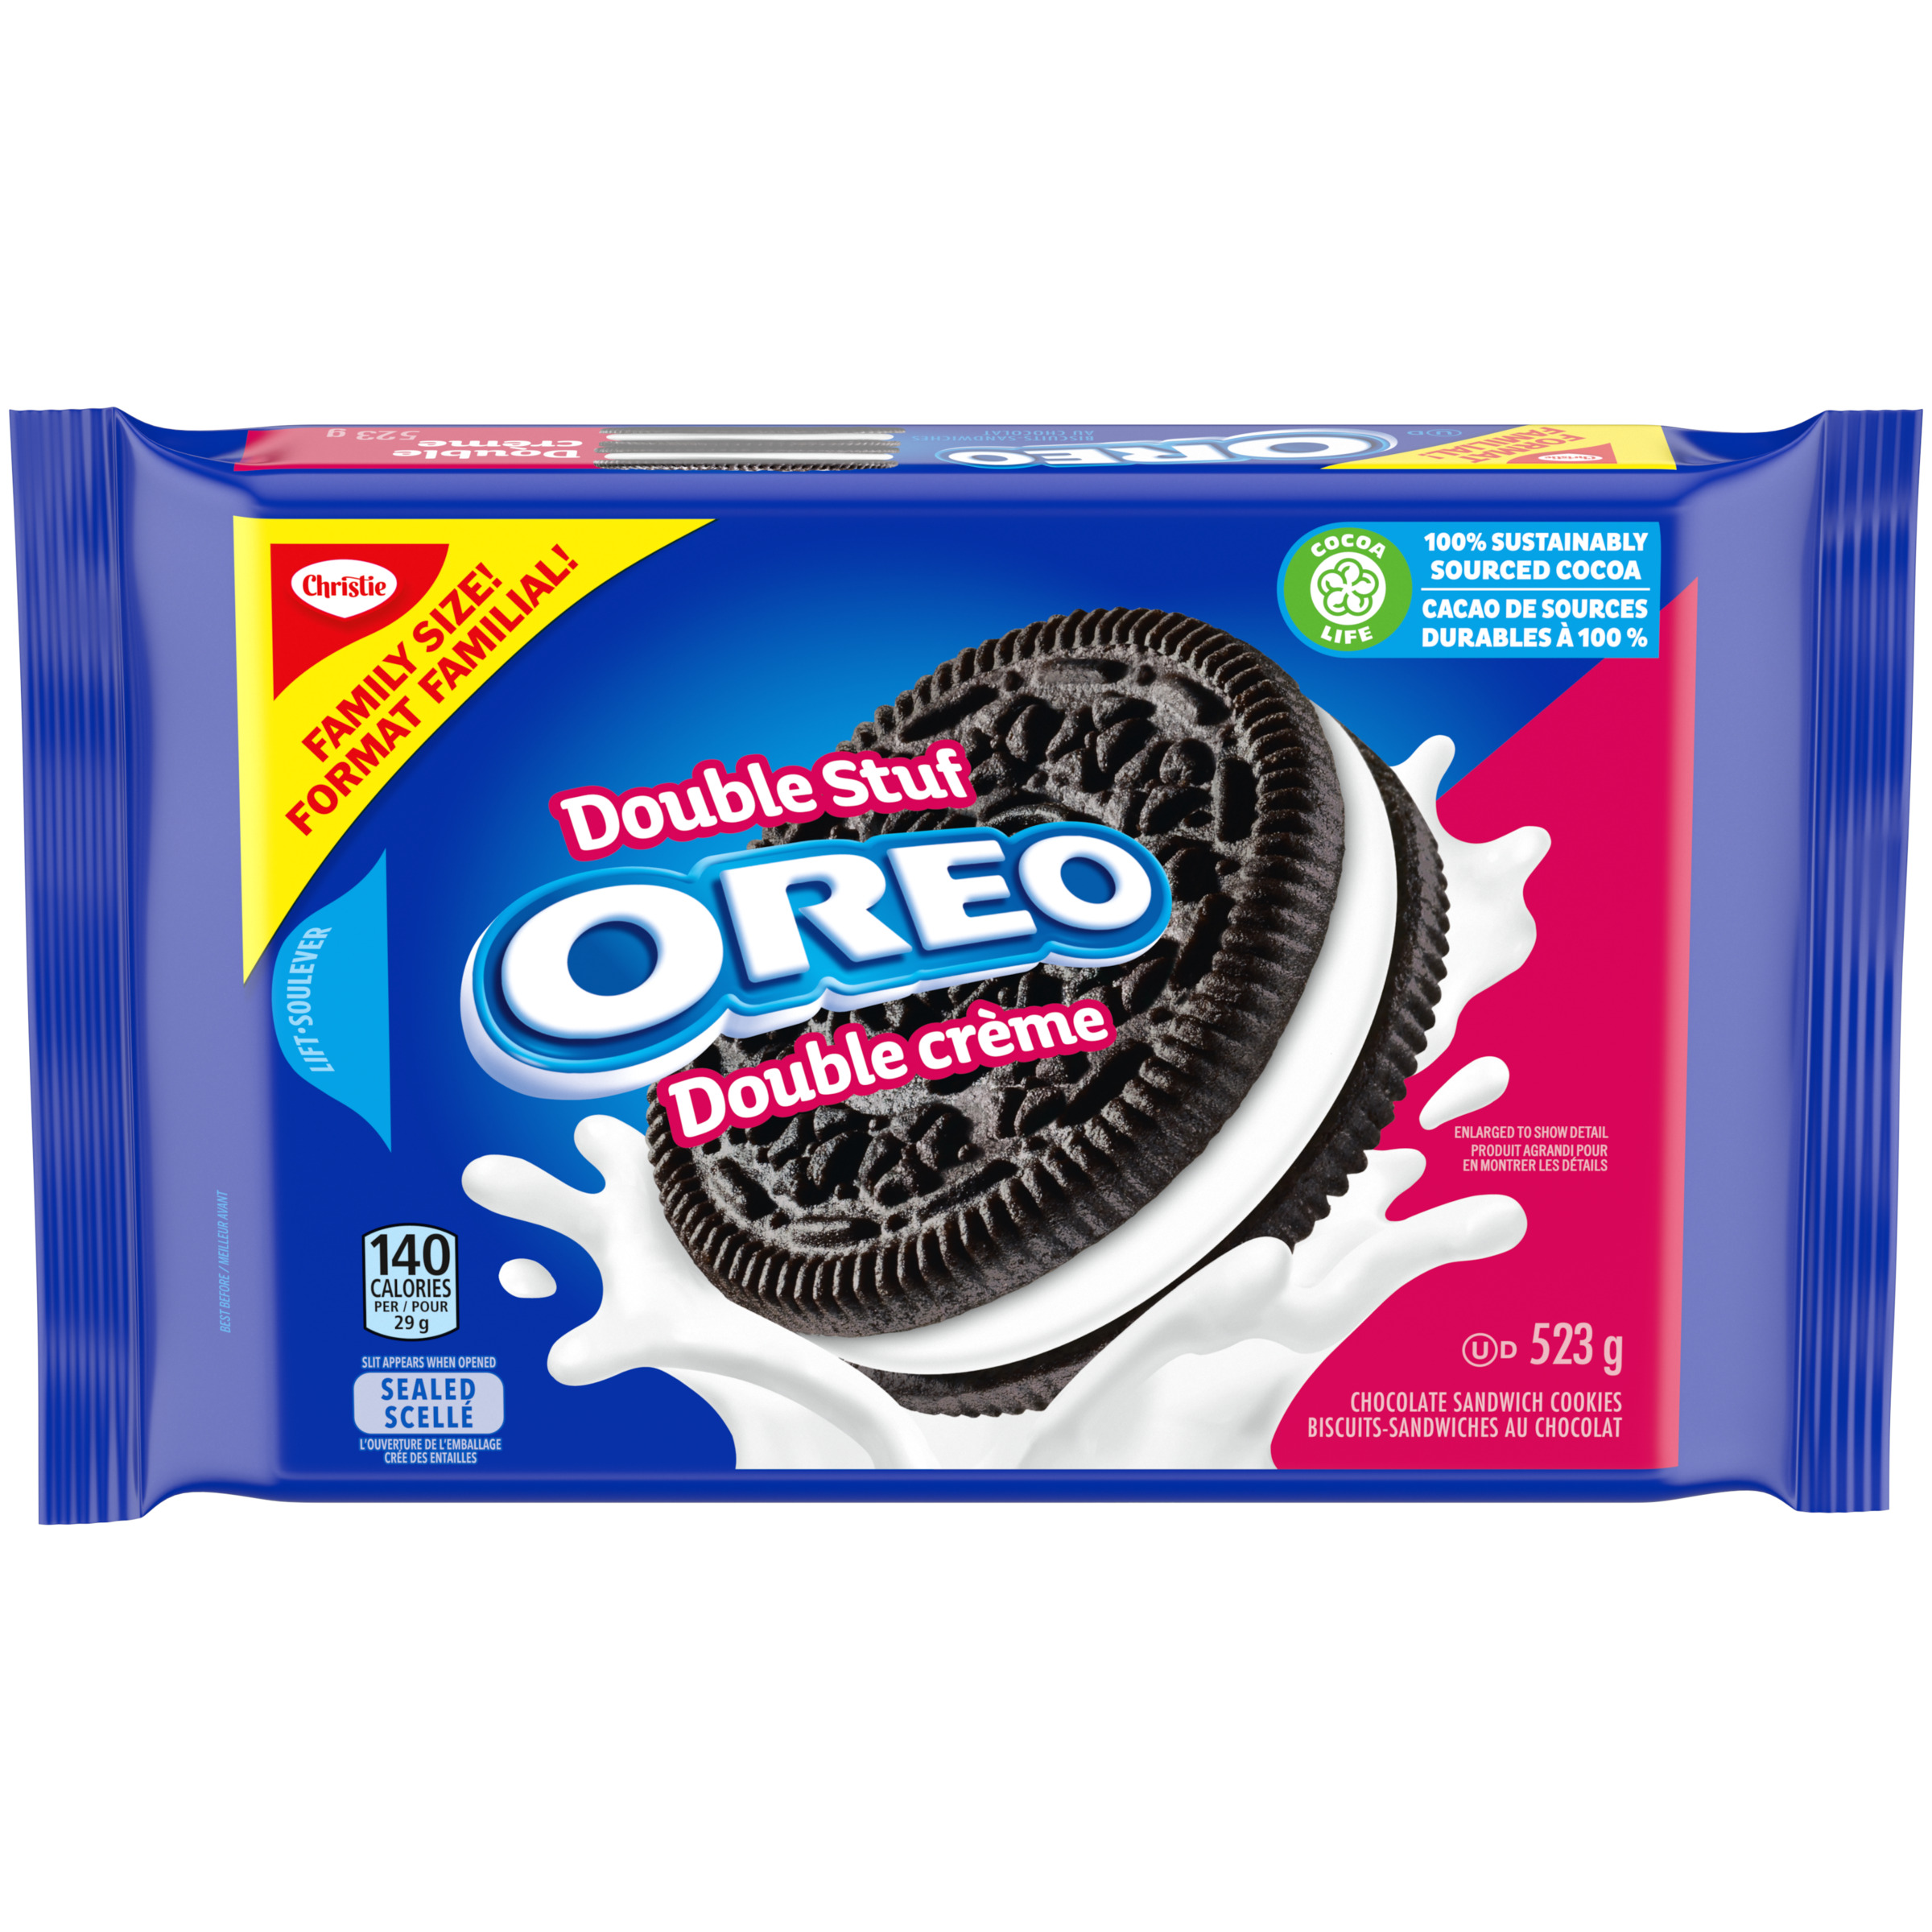 OREO Double Stuf Sandwich Cookies, 1 Family Size Resealable Pack (523g)